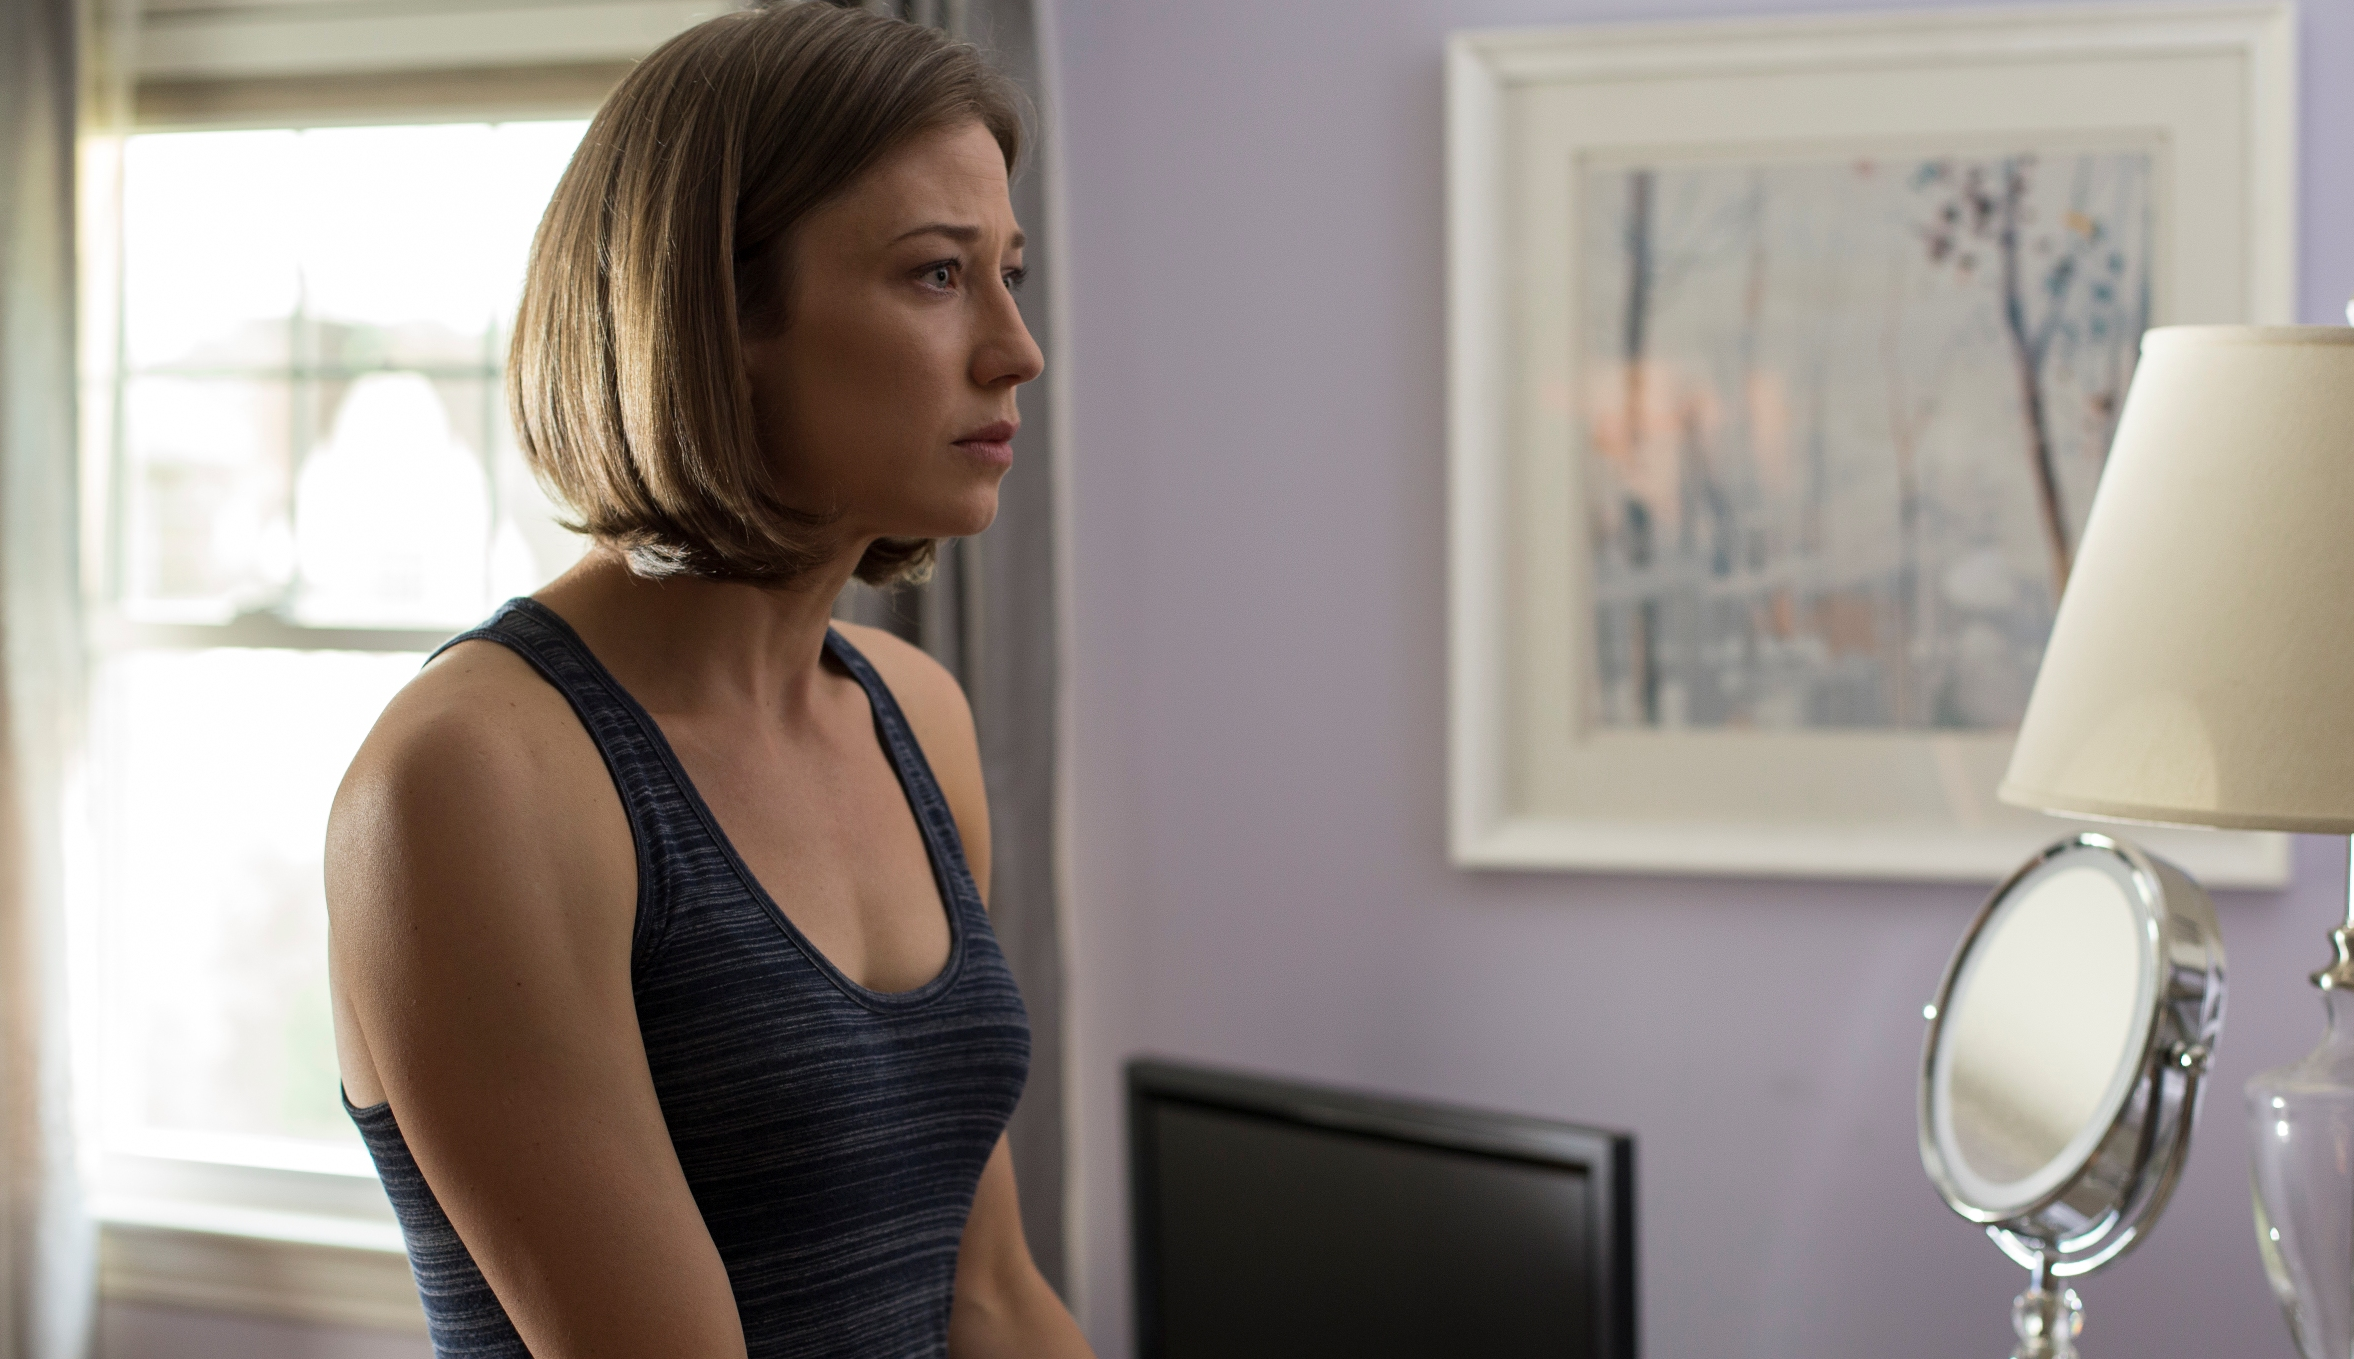 Fargo Casts The Leftovers Carrie Coon in Female Lead for Season 3 - Nerdcor...